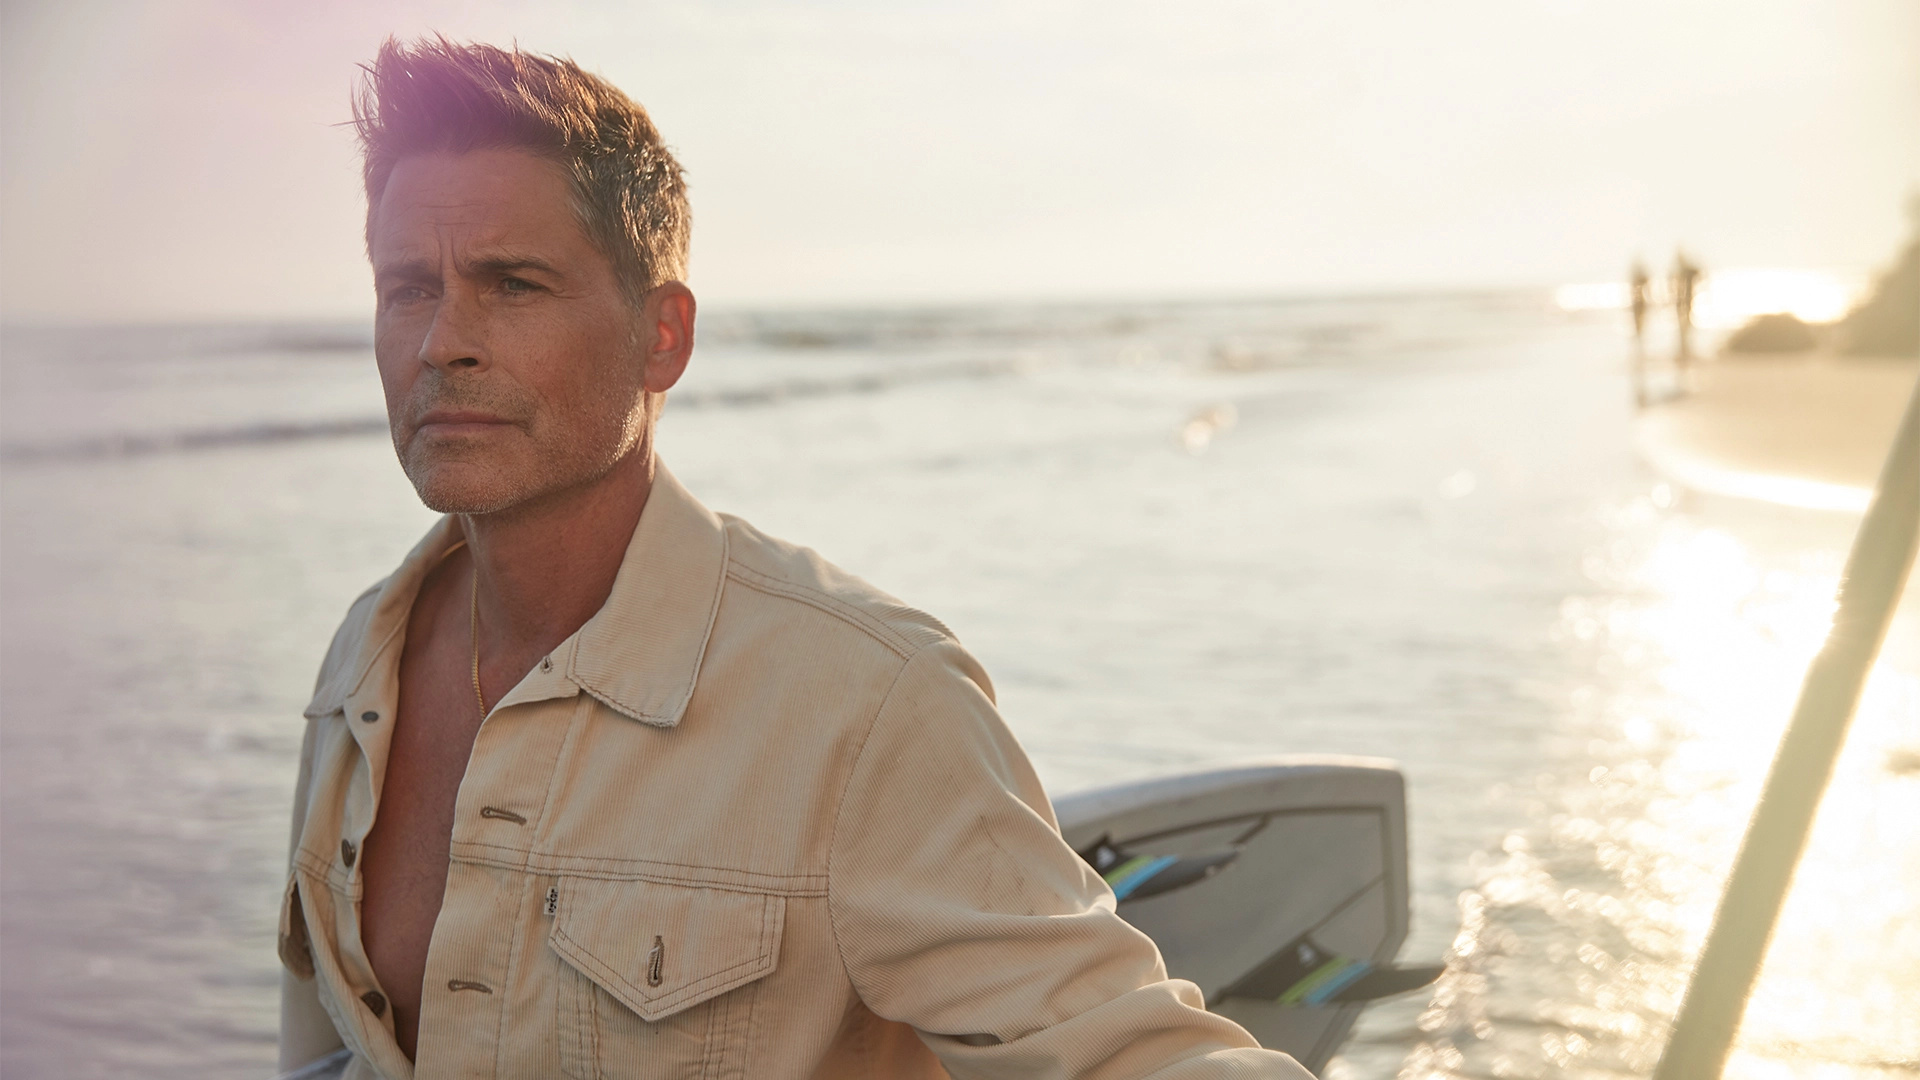 Embraced sobriety, Person he always, Rob Lowe, Variety, 1920x1080 Full HD Desktop